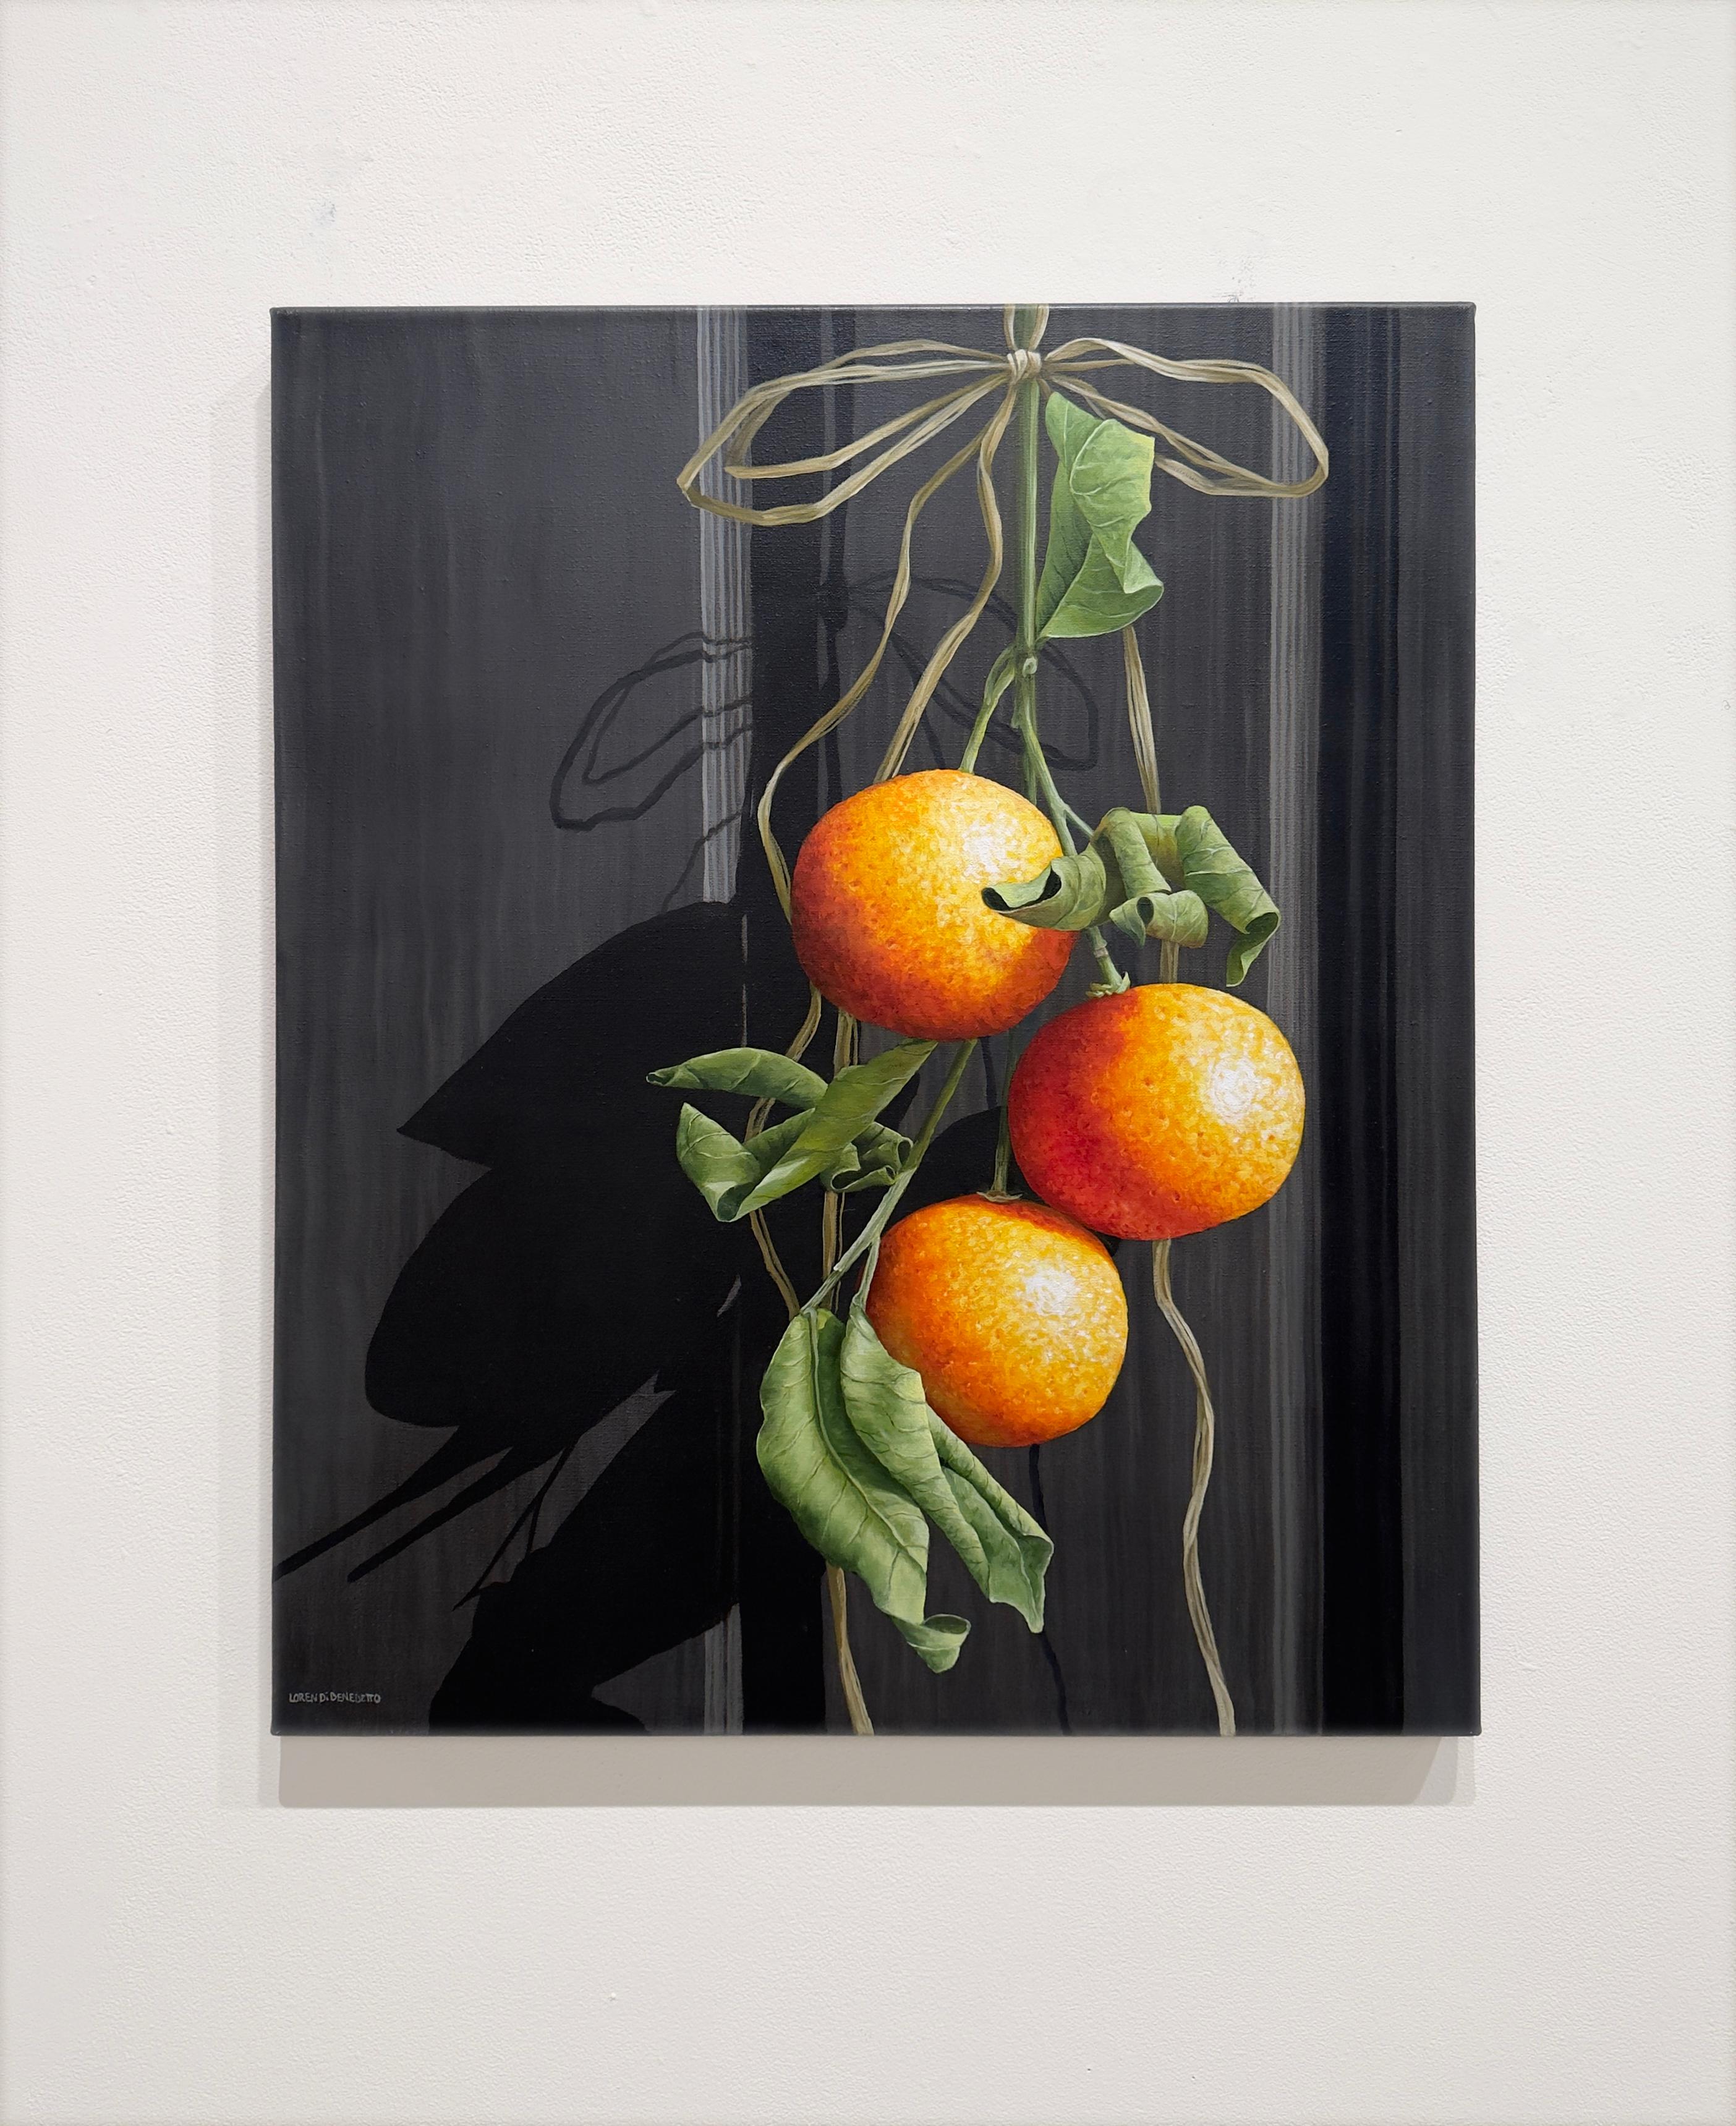 TANGERINES - Contemporary Realism / Still Life - Painting by Loren DiBenedetto